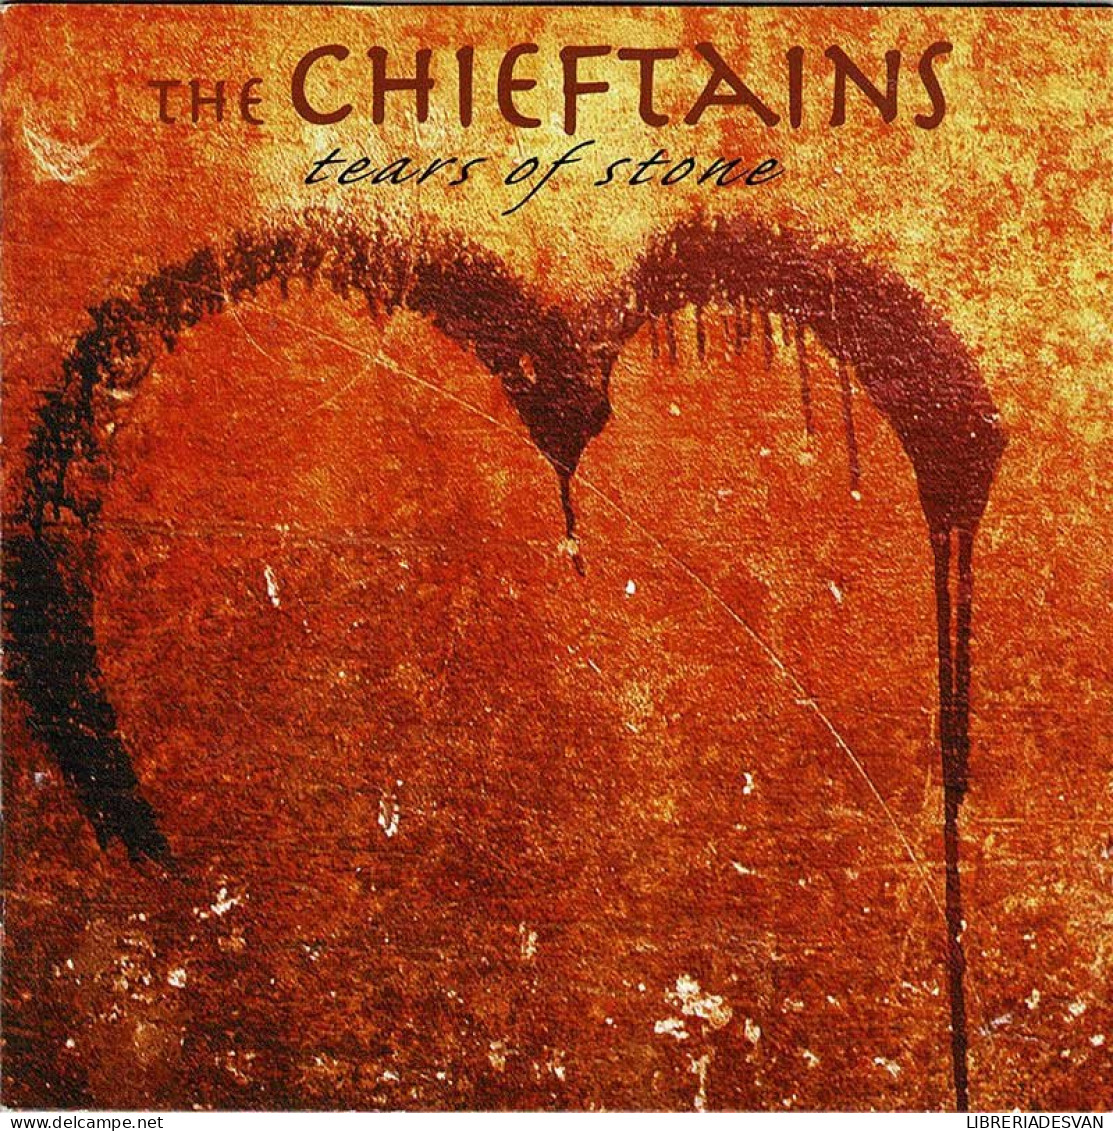 The Chieftains - Tears Of Stone. CD - Country Et Folk